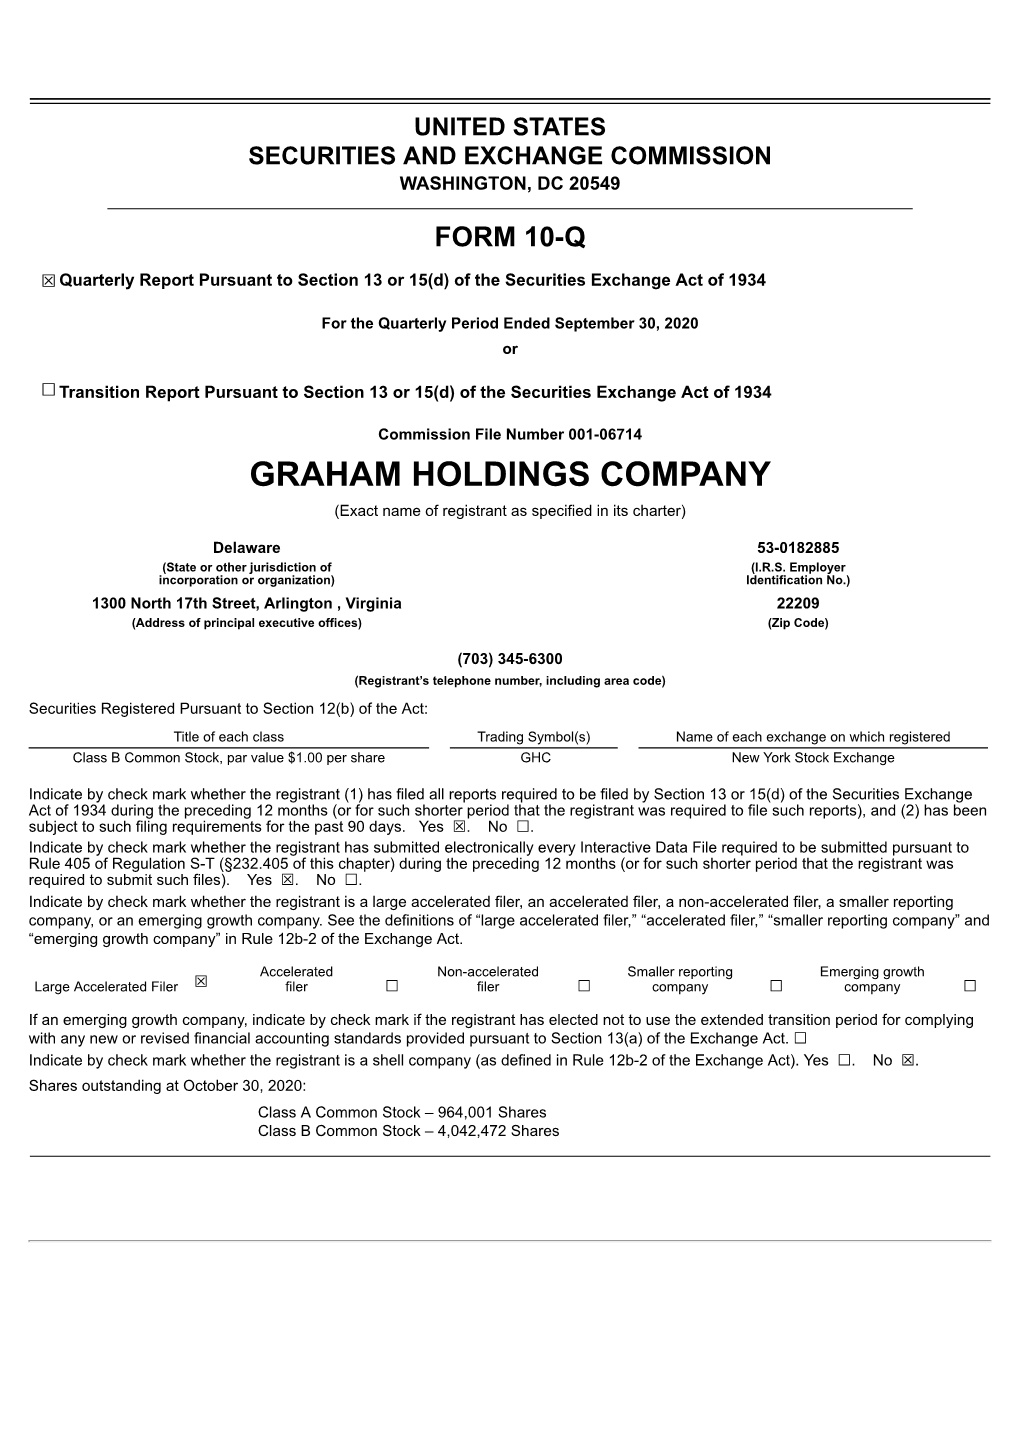 GRAHAM HOLDINGS COMPANY (Exact Name of Registrant As Specified in Its Charter)